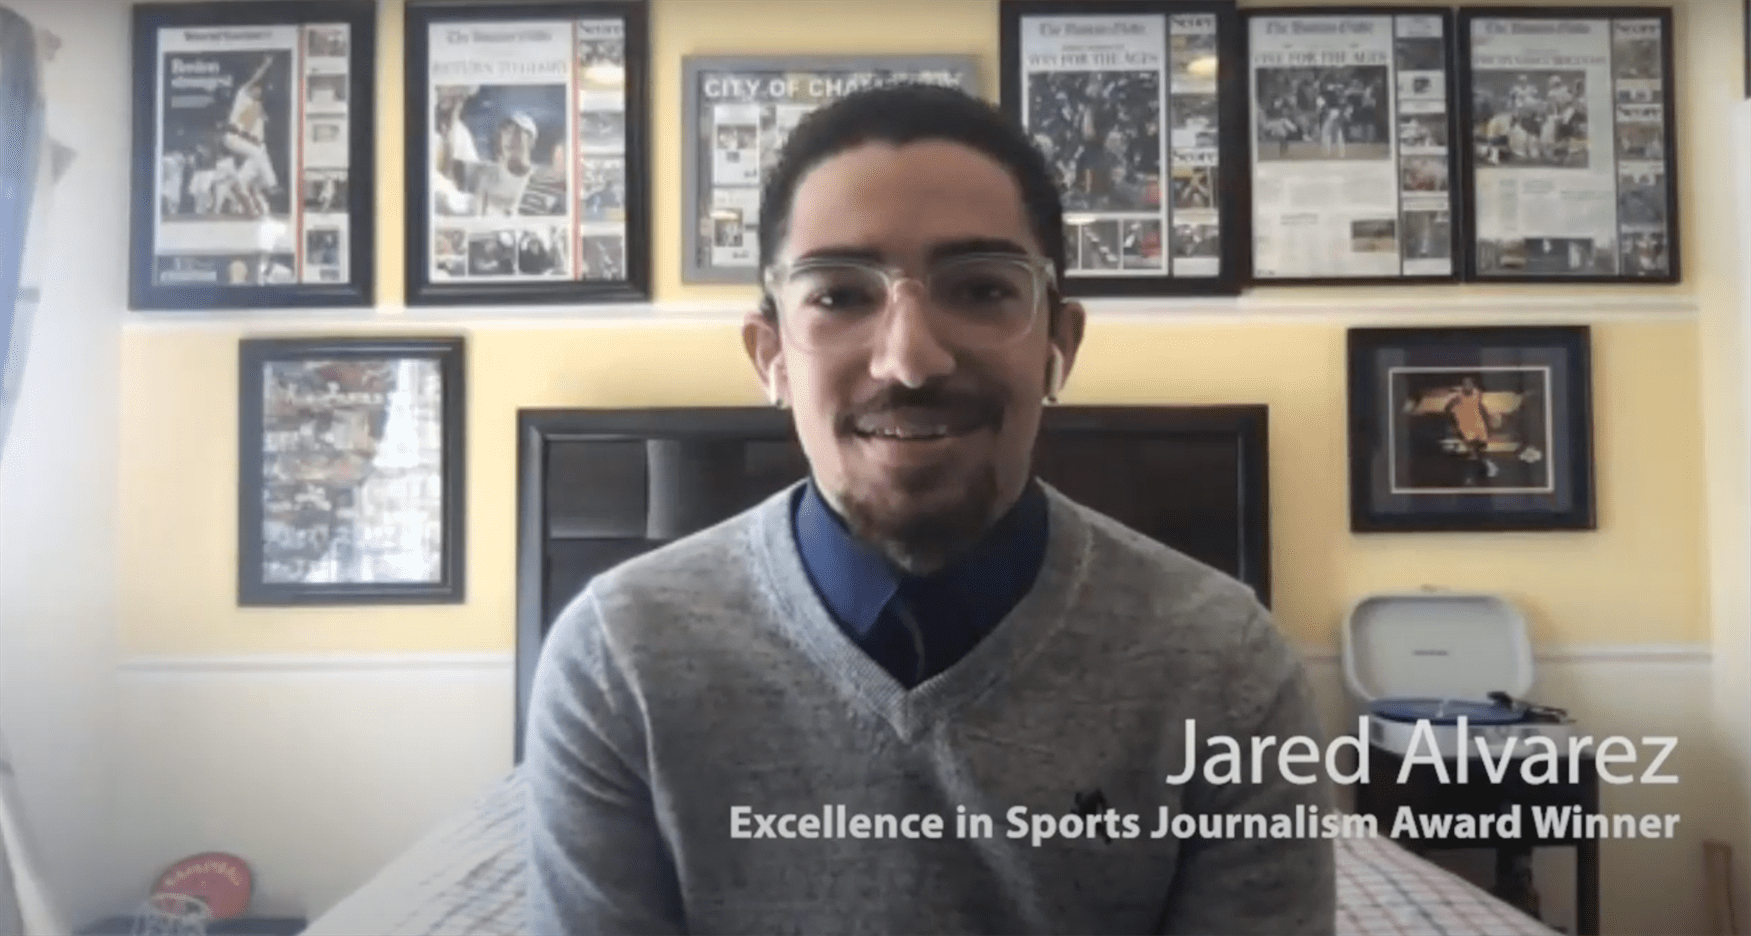 Jared Alvarez is recognized for his excellence in sports journalism. Photo Courtesy of the School of Communication and Media.